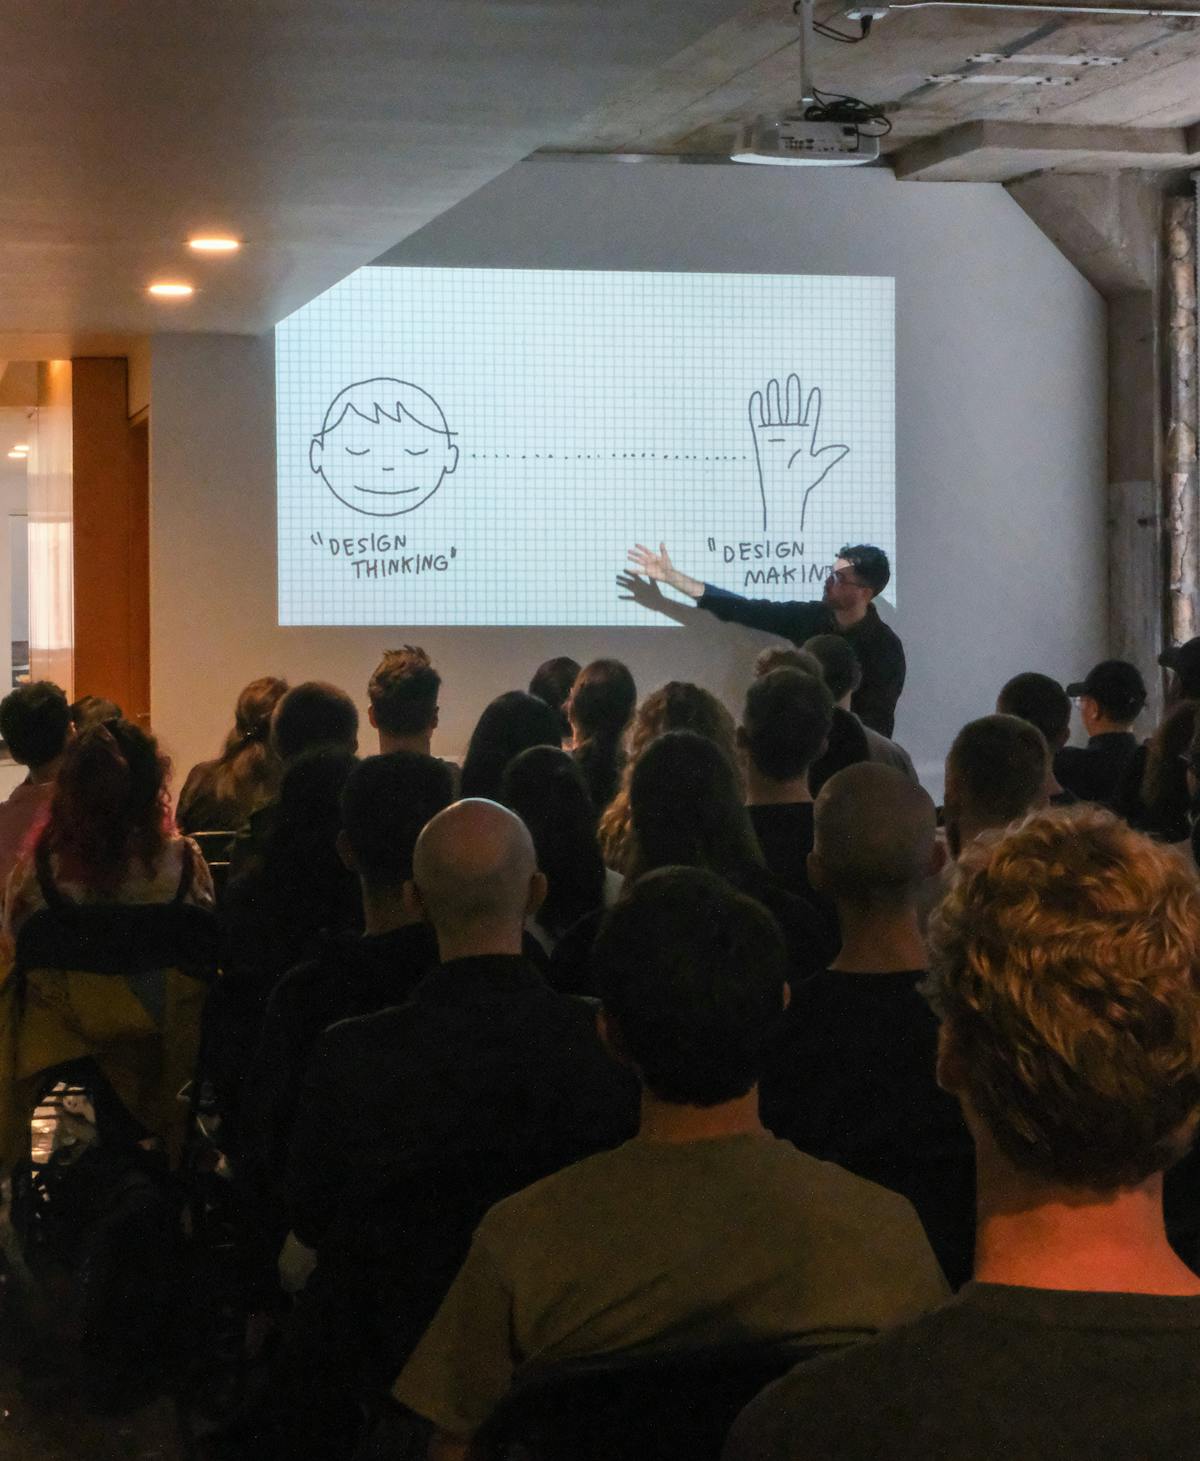 A man with glasses standing in front of a wall gestures towards a projection of a drawing that says 'design thinking...design making' with his right arm, in front of a crowd of people sitting in chairs, facing the man and the projection.